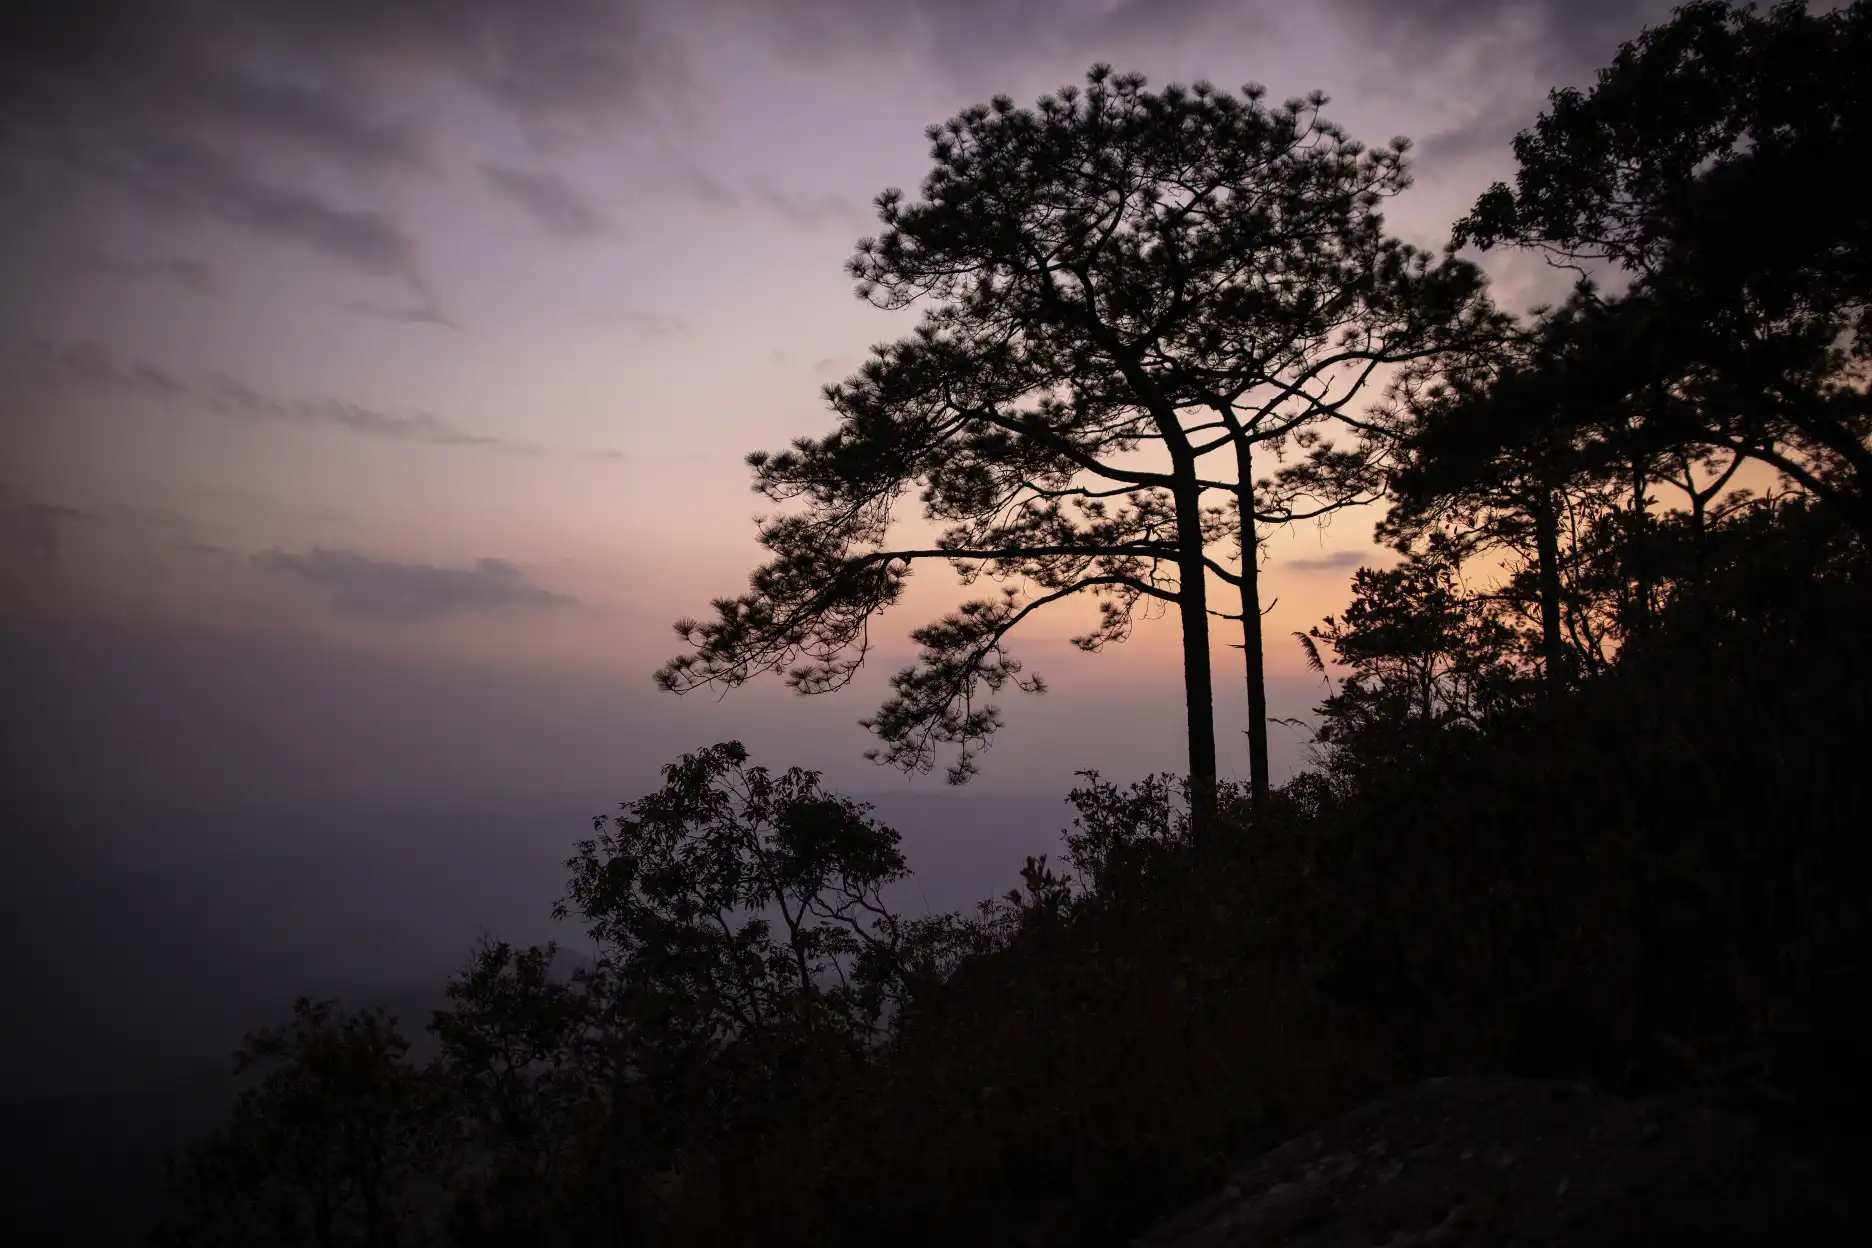 Evening landscape with trees at the Phu Kradueng National Park in Thailand